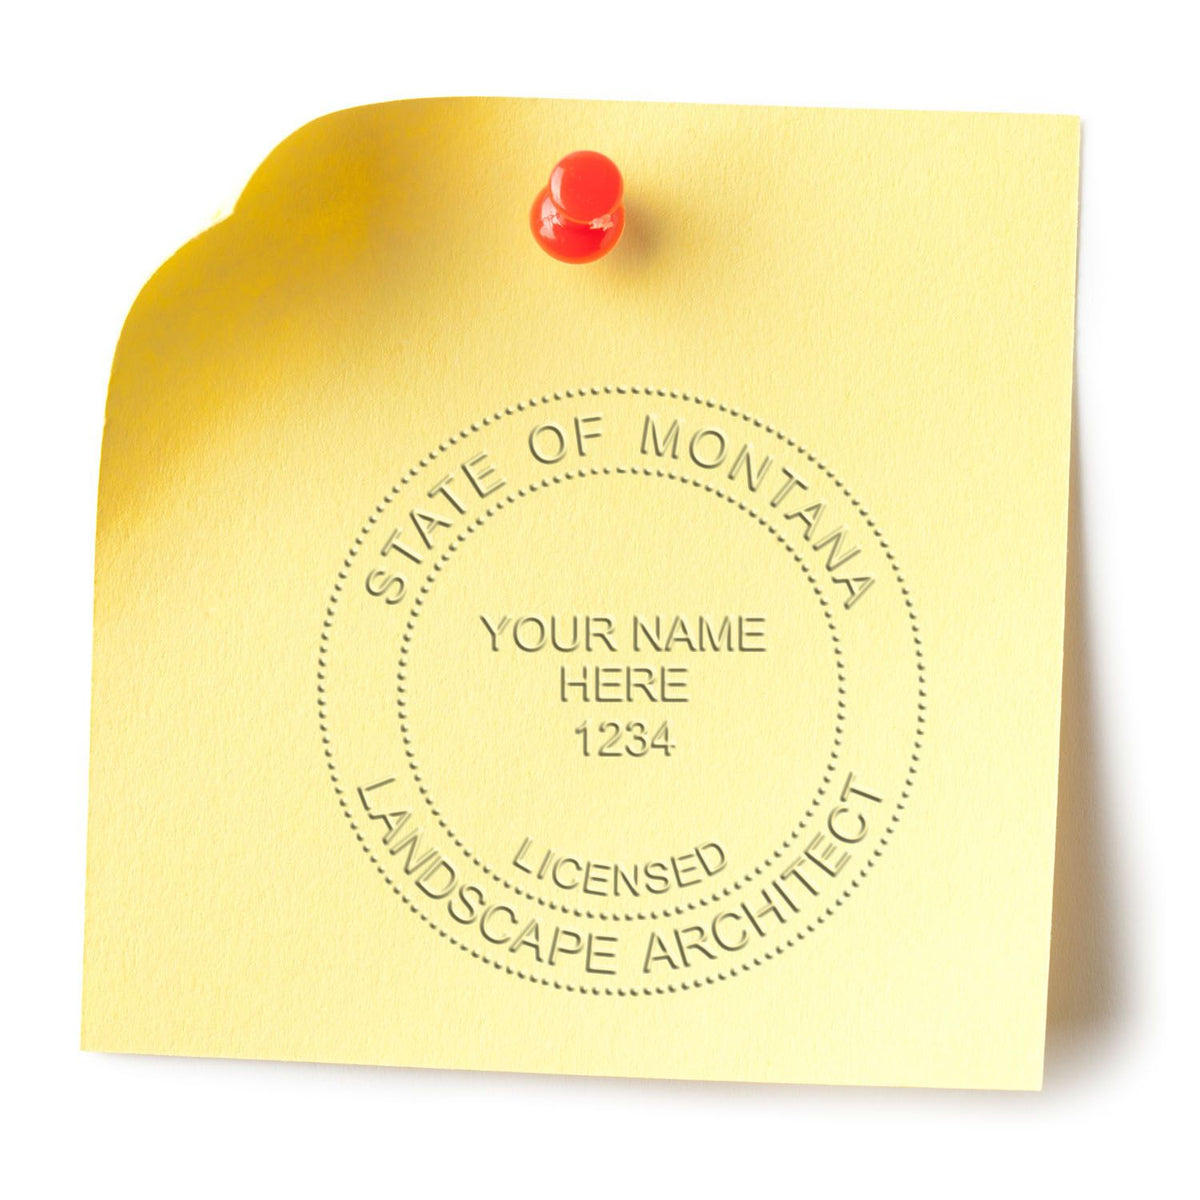 A lifestyle photo showing a stamped image of the Soft Pocket Montana Landscape Architect Embosser on a piece of paper